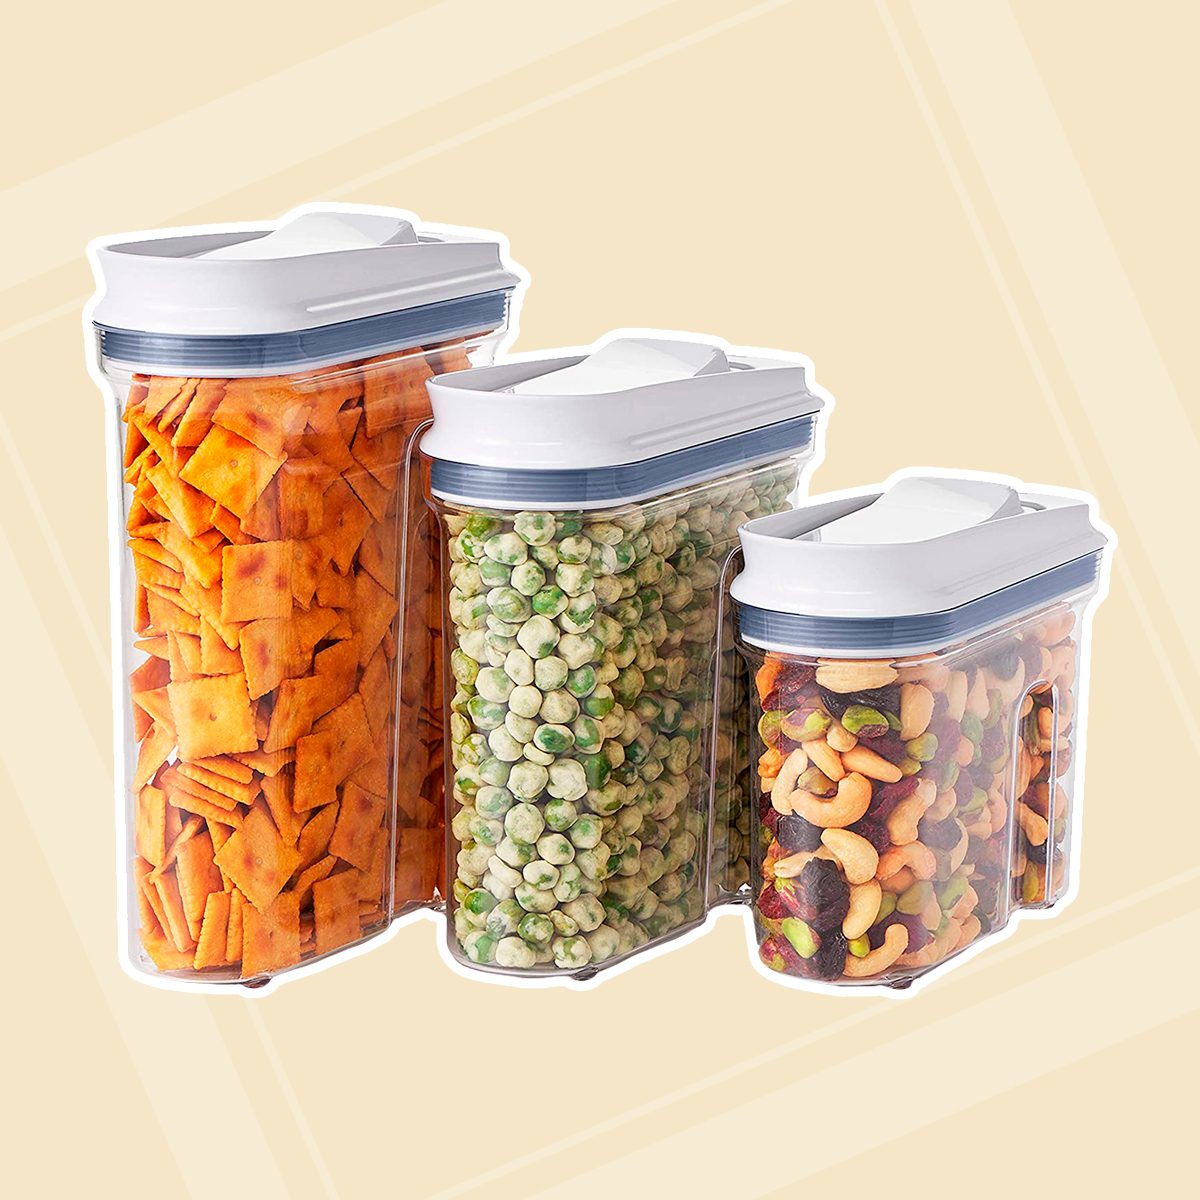 https://www.tasteofhome.com/wp-content/uploads/2020/08/cereal-storage-containers-SCBS.jpg?fit=700%2C700